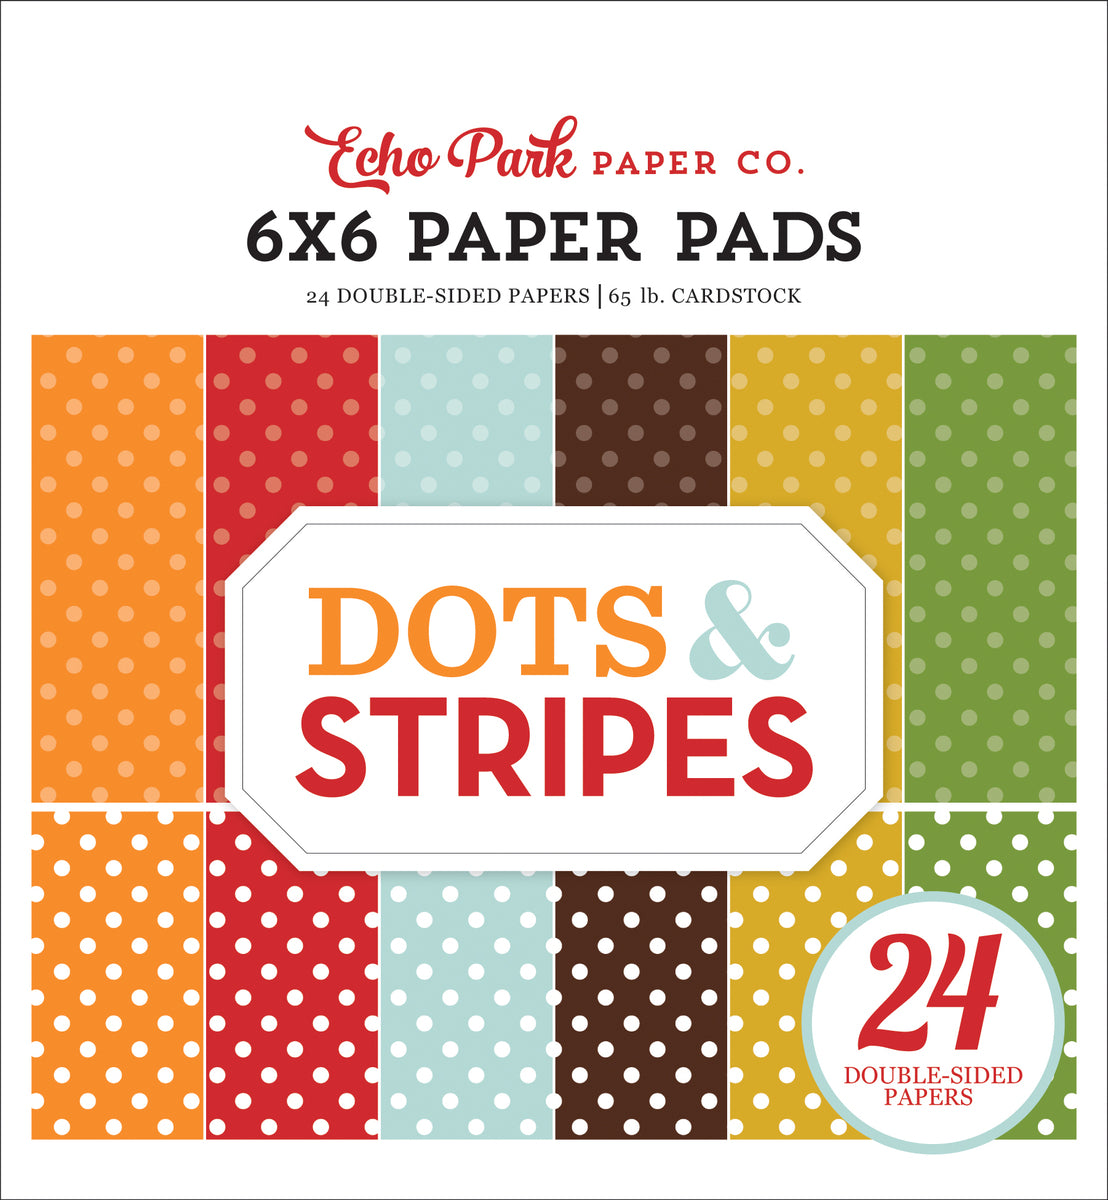 Fall Dots - 6x6 paper pad with 24 double-sided sheets - Echo Park Paper